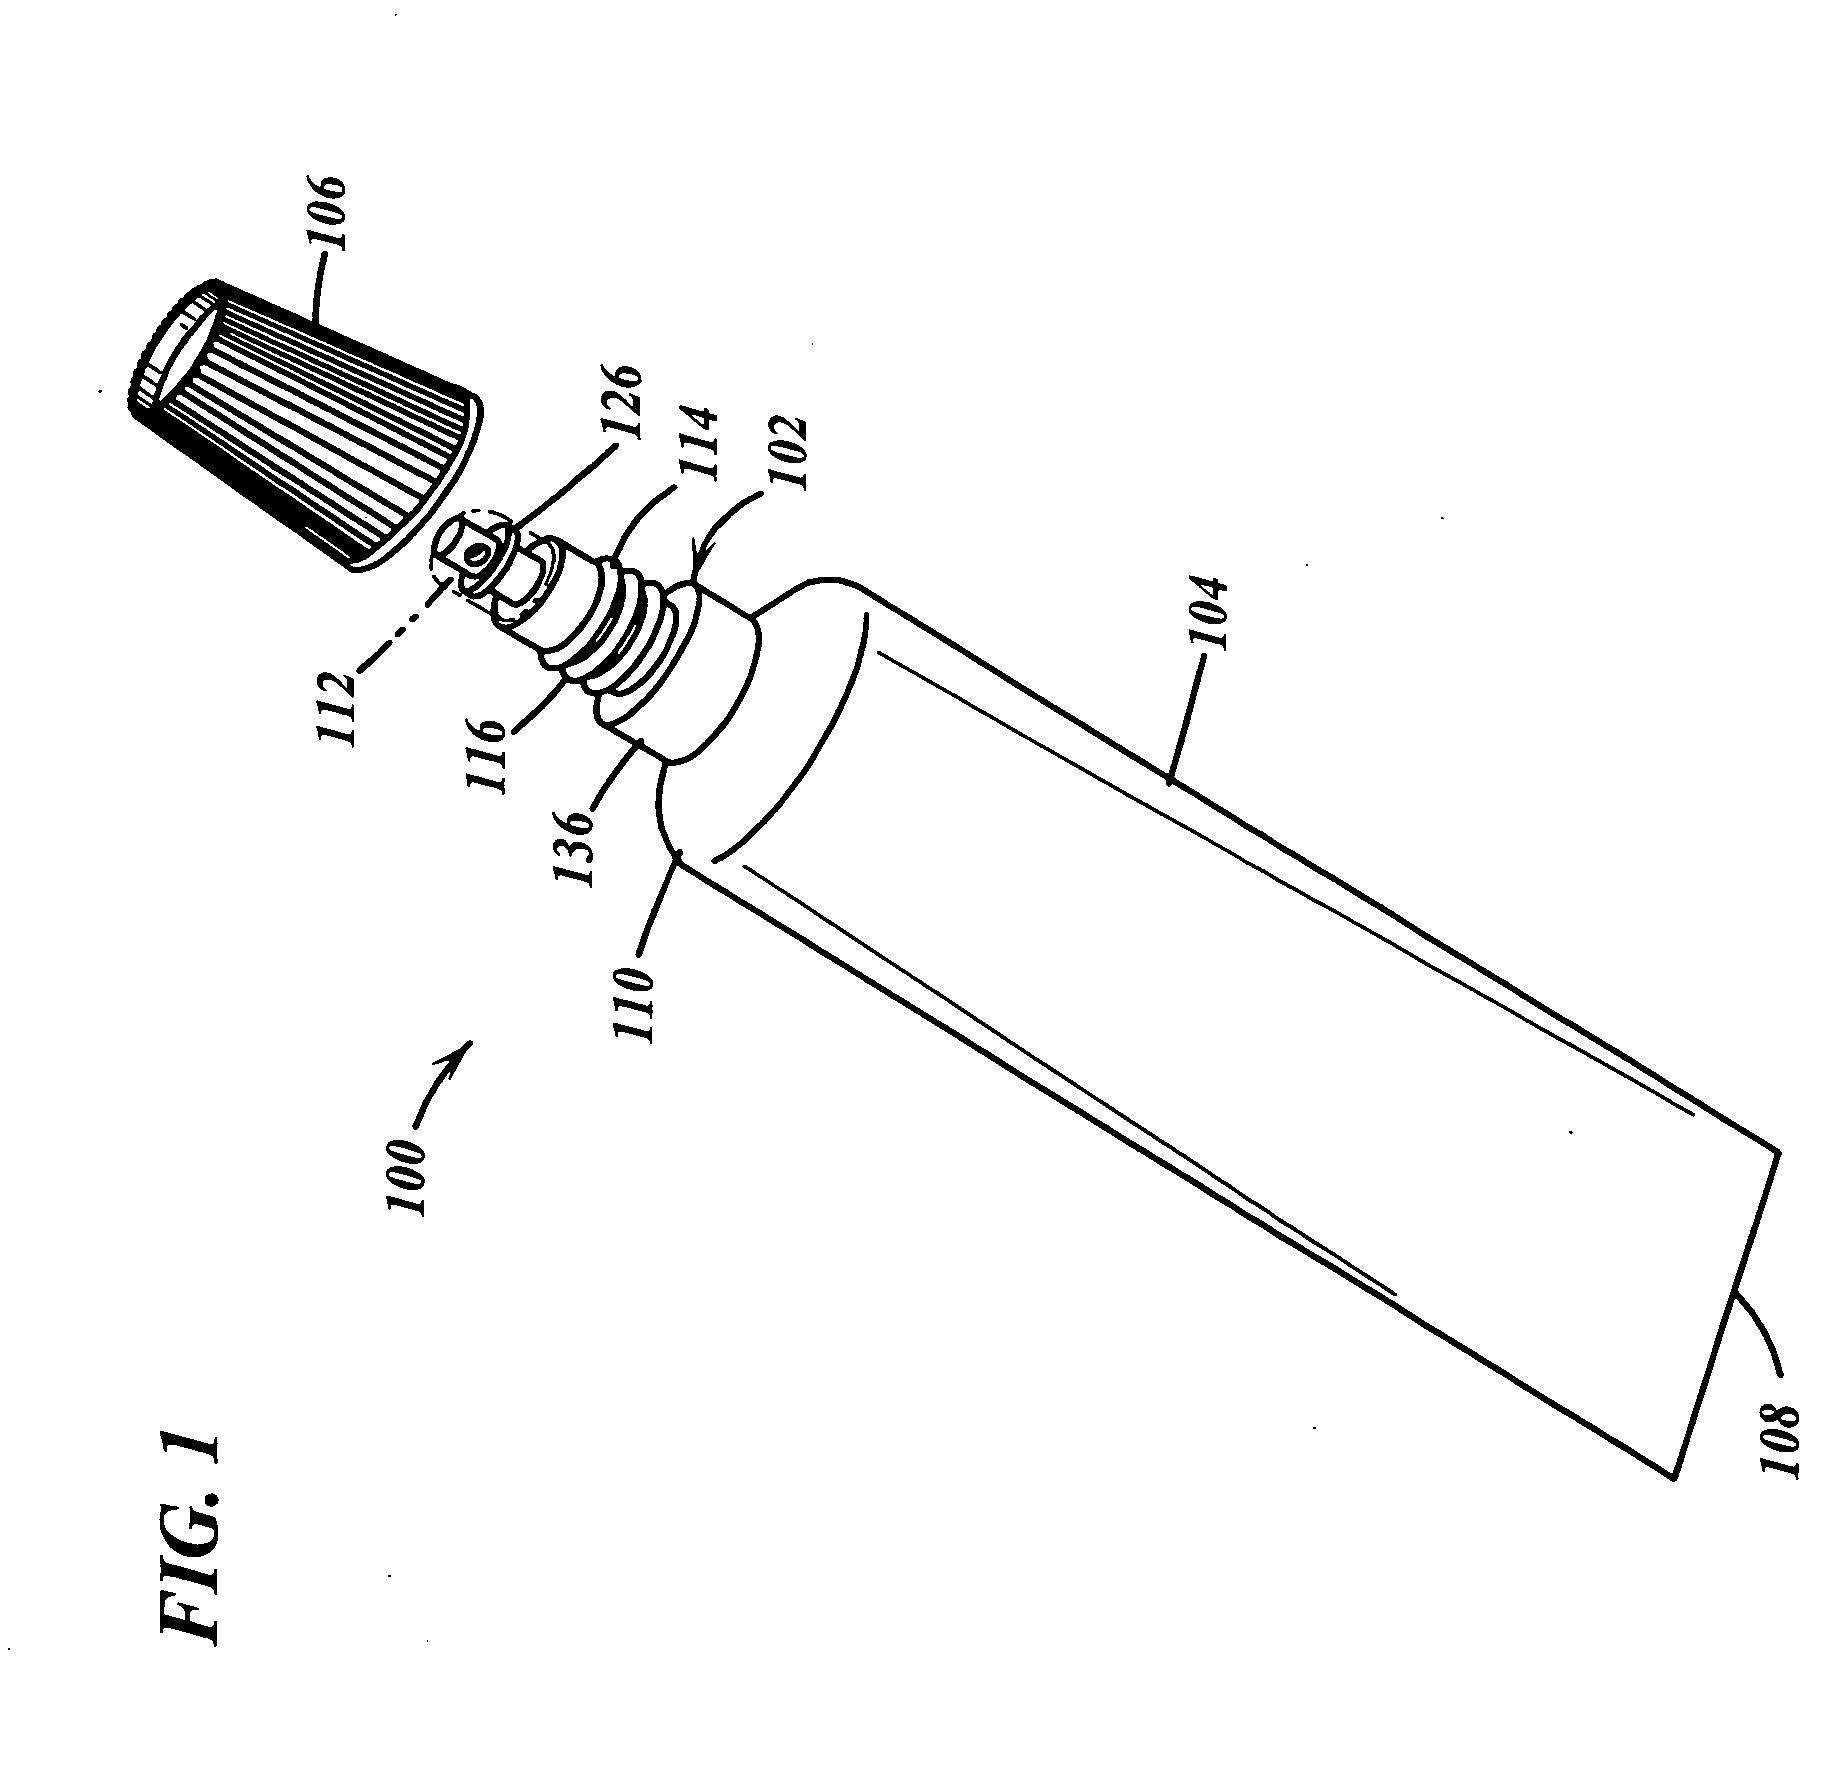 Container and valve assembly for storing and dispensing substances, and related method